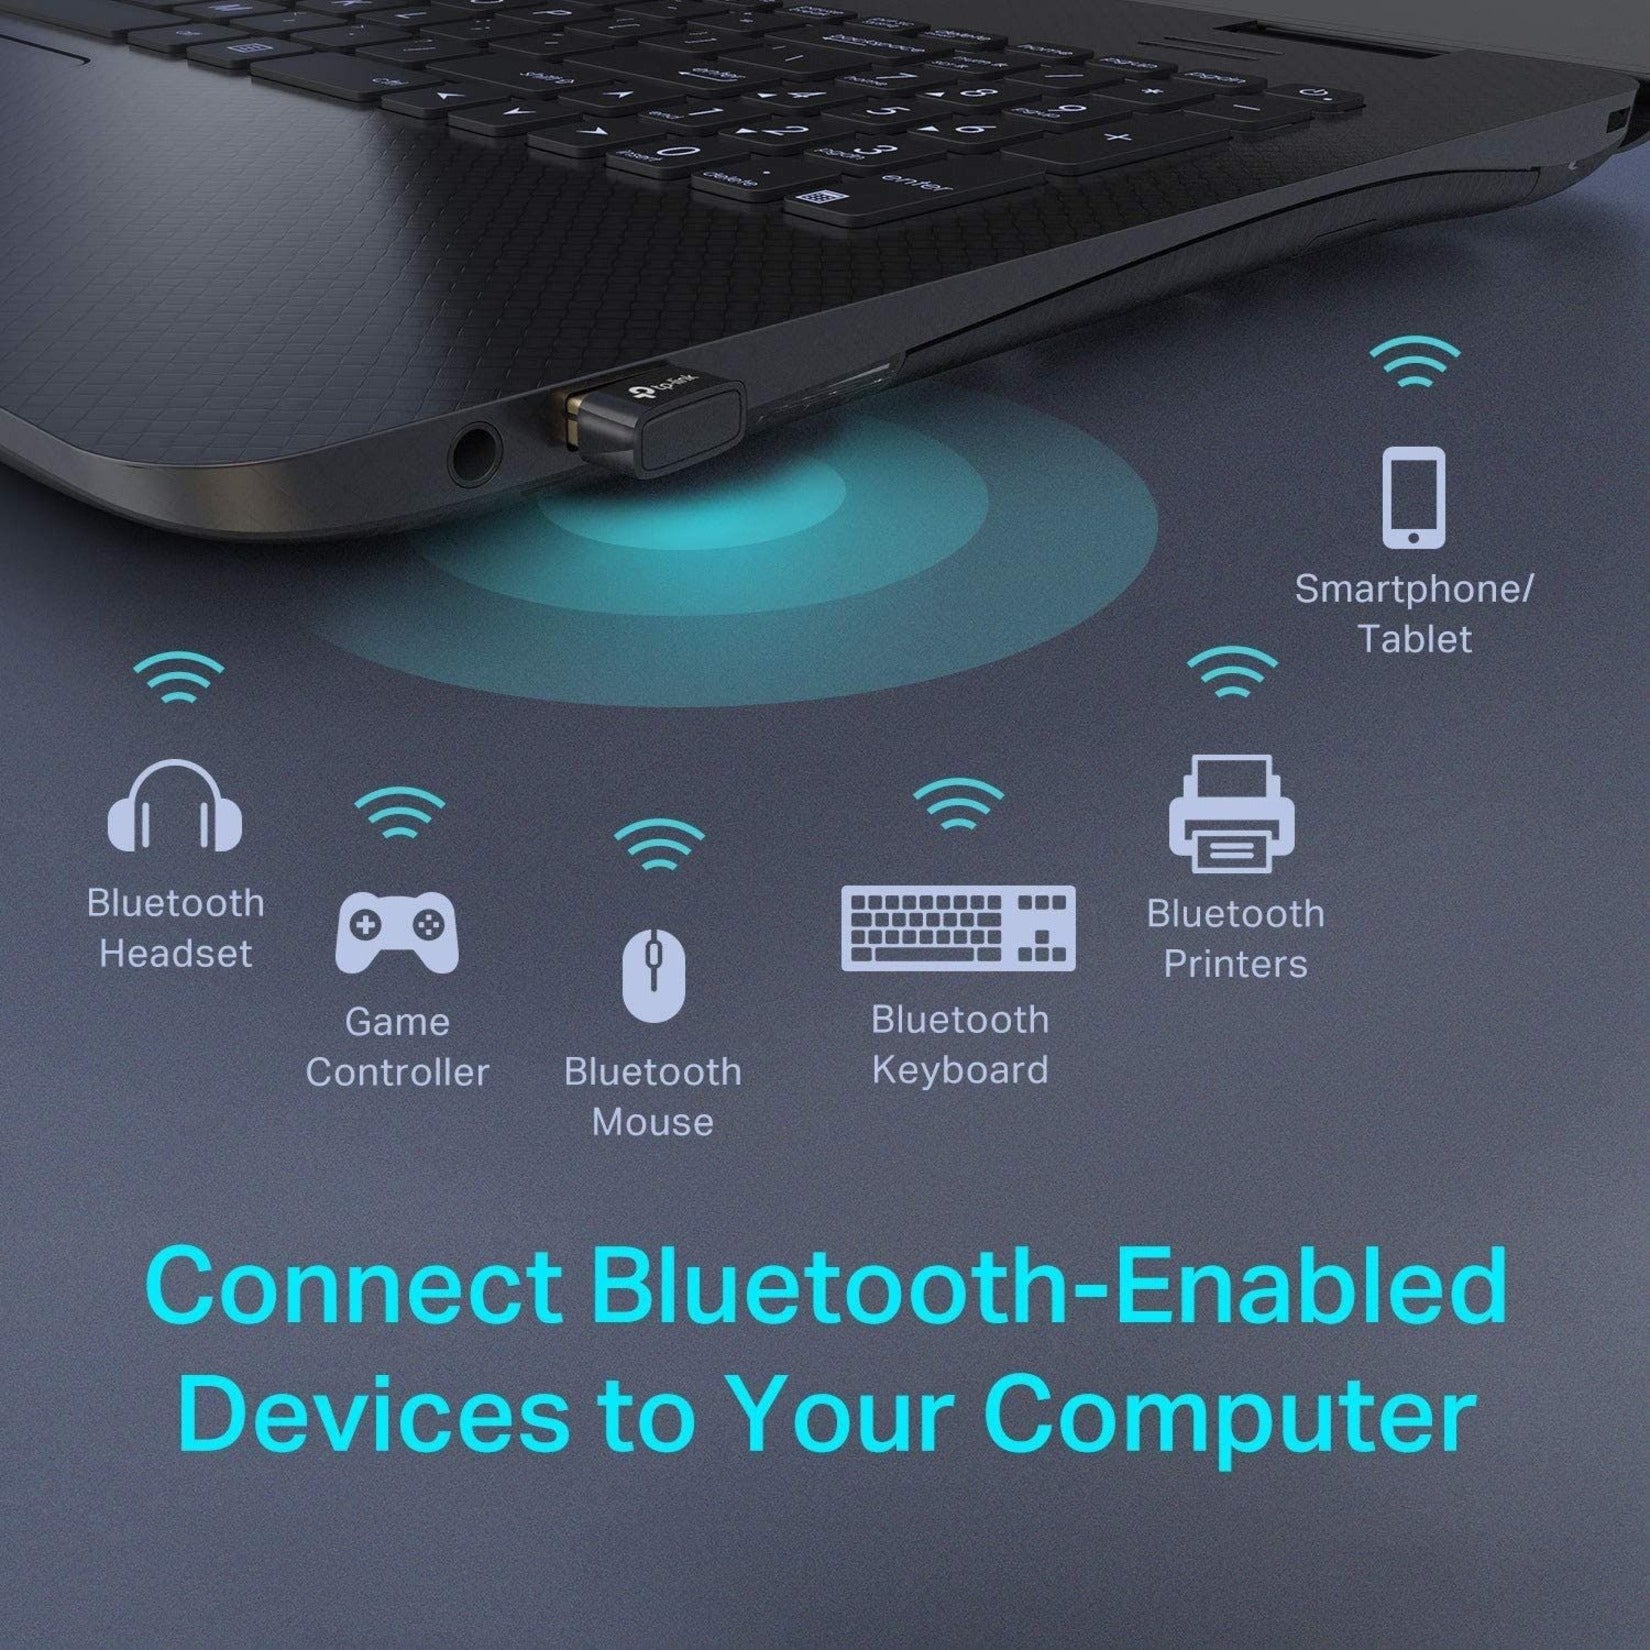 TP-Link UB400 Bluetooth 4.0 Nano USB Adapter for Computer/Notebook, Enhanced Wireless Connectivity